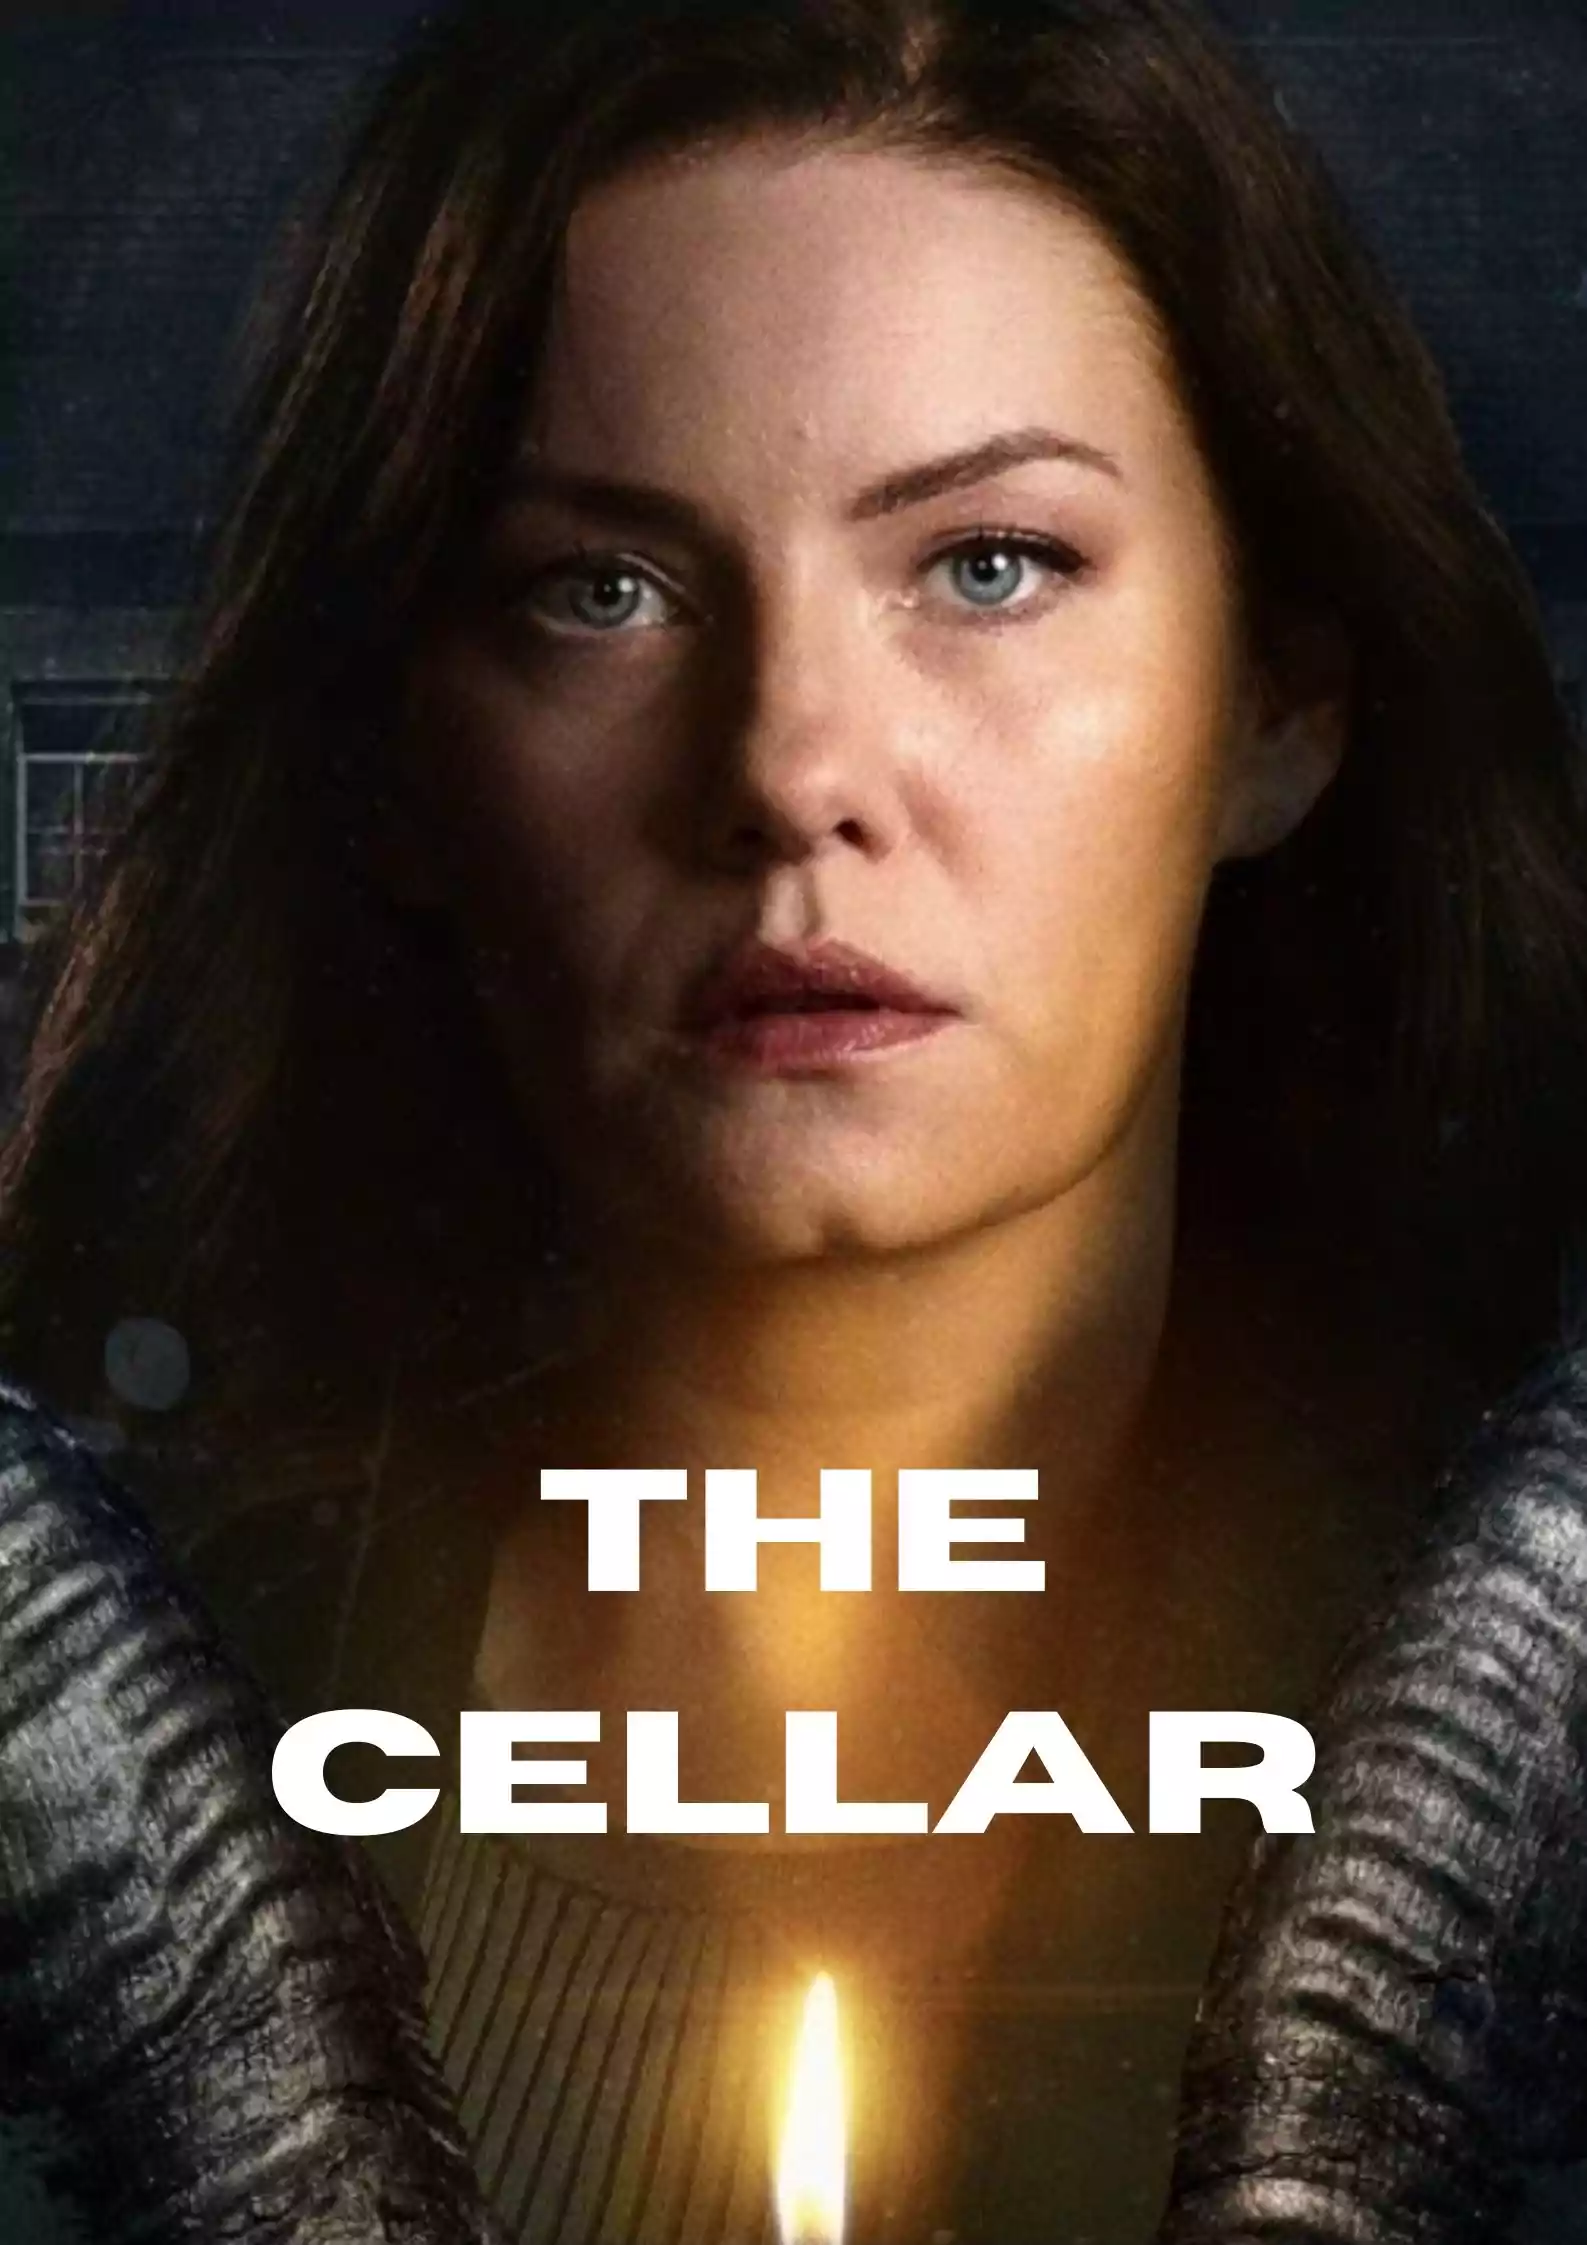 The Cellar Parents guide | The Cellar Age Rating | 2022